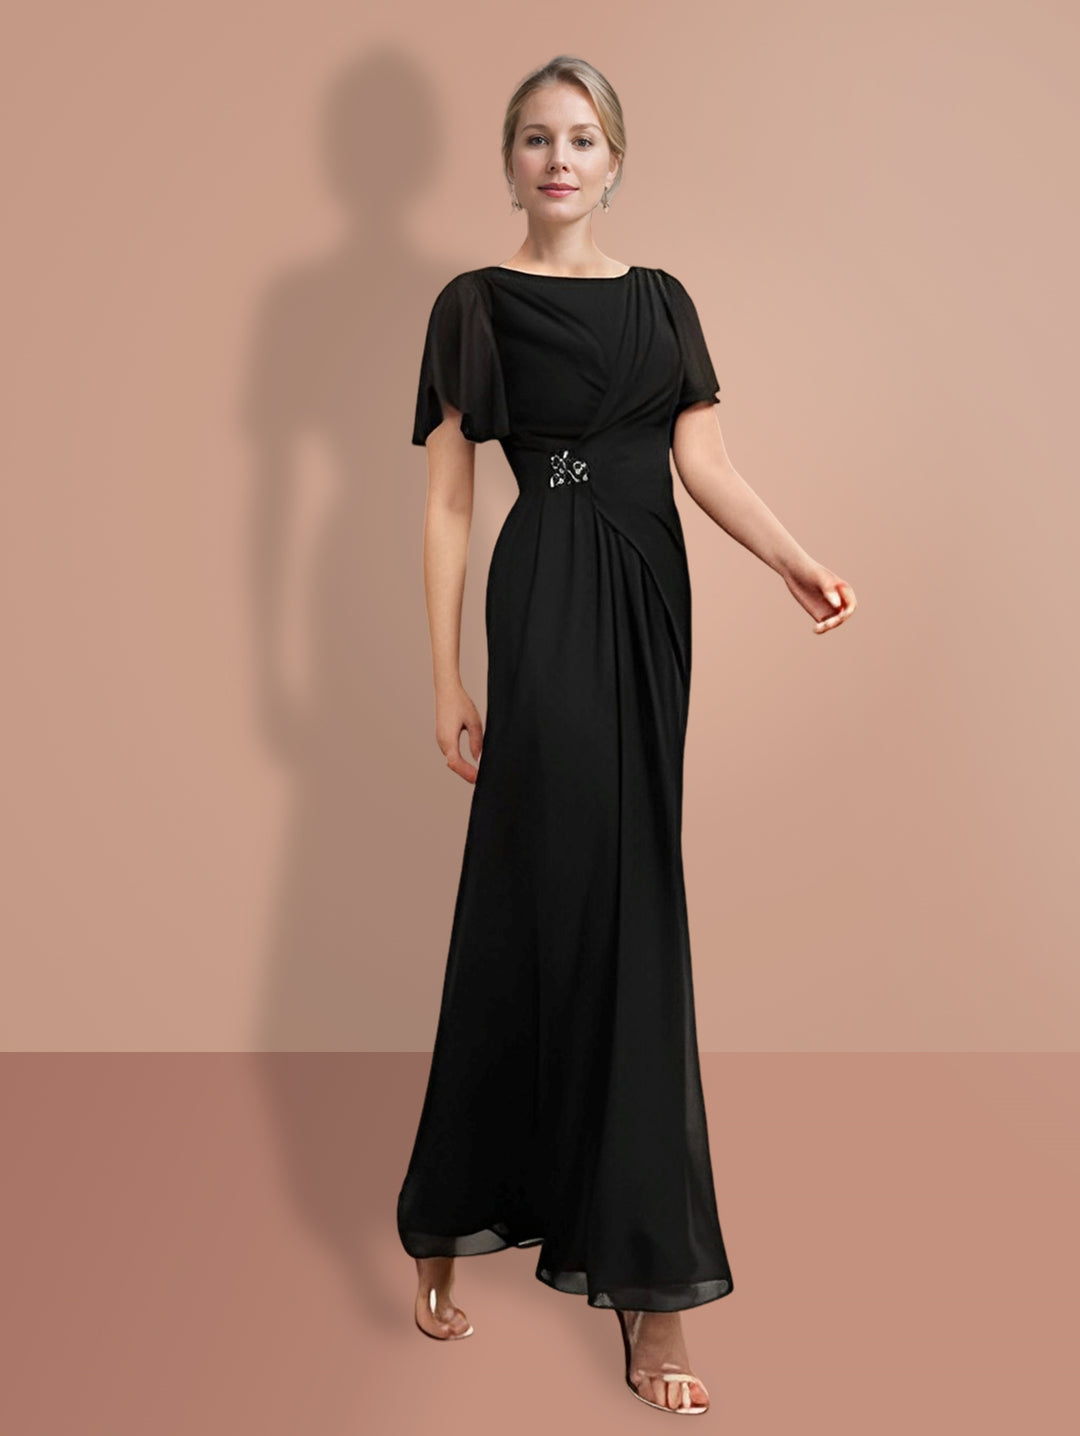 Sheath/Column Ankle-Length Short Sleeves Mother of the Bride Dresses